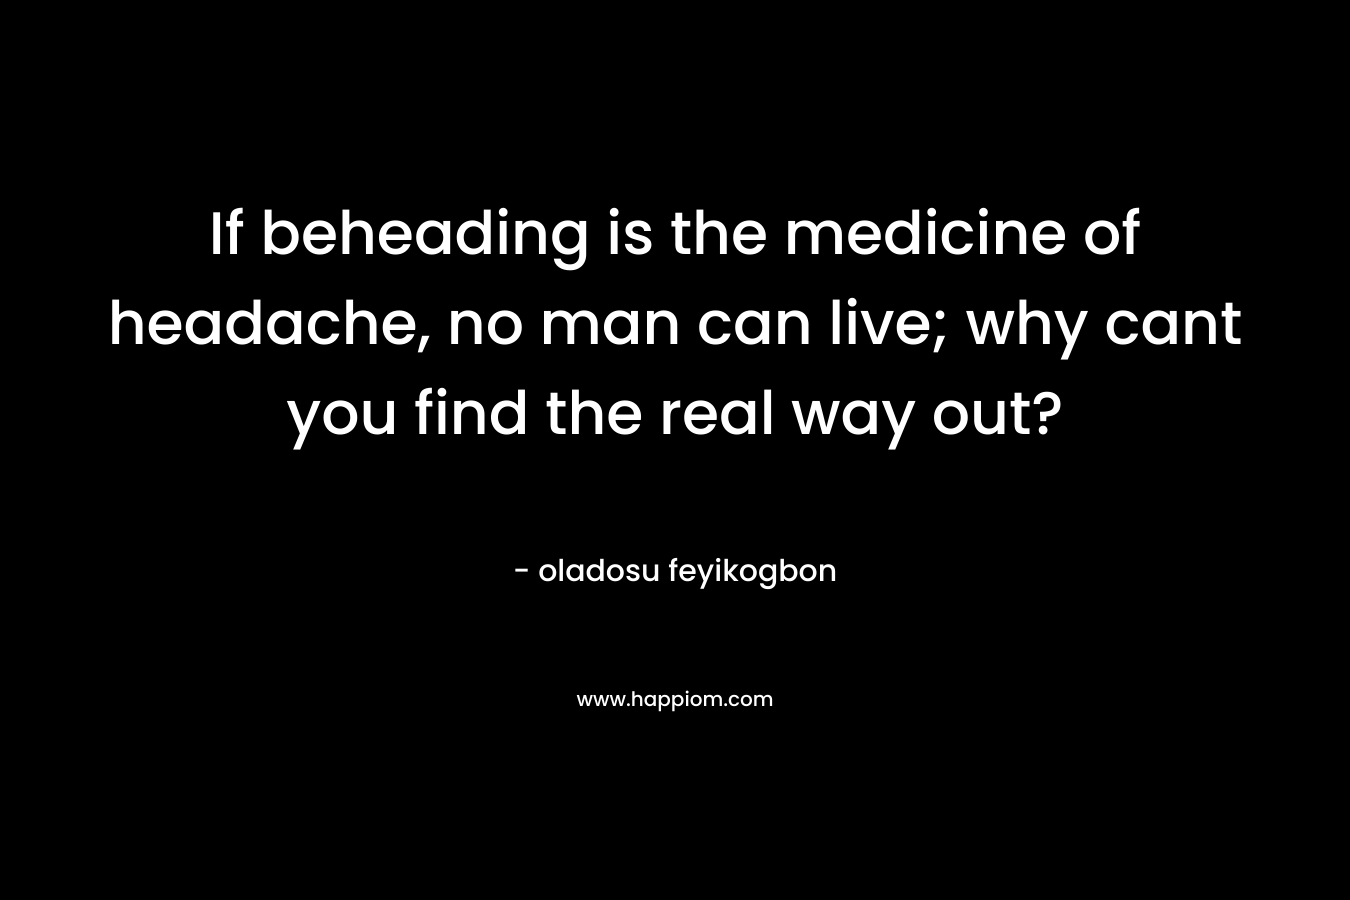 If beheading is the medicine of headache, no man can live; why cant you find the real way out?